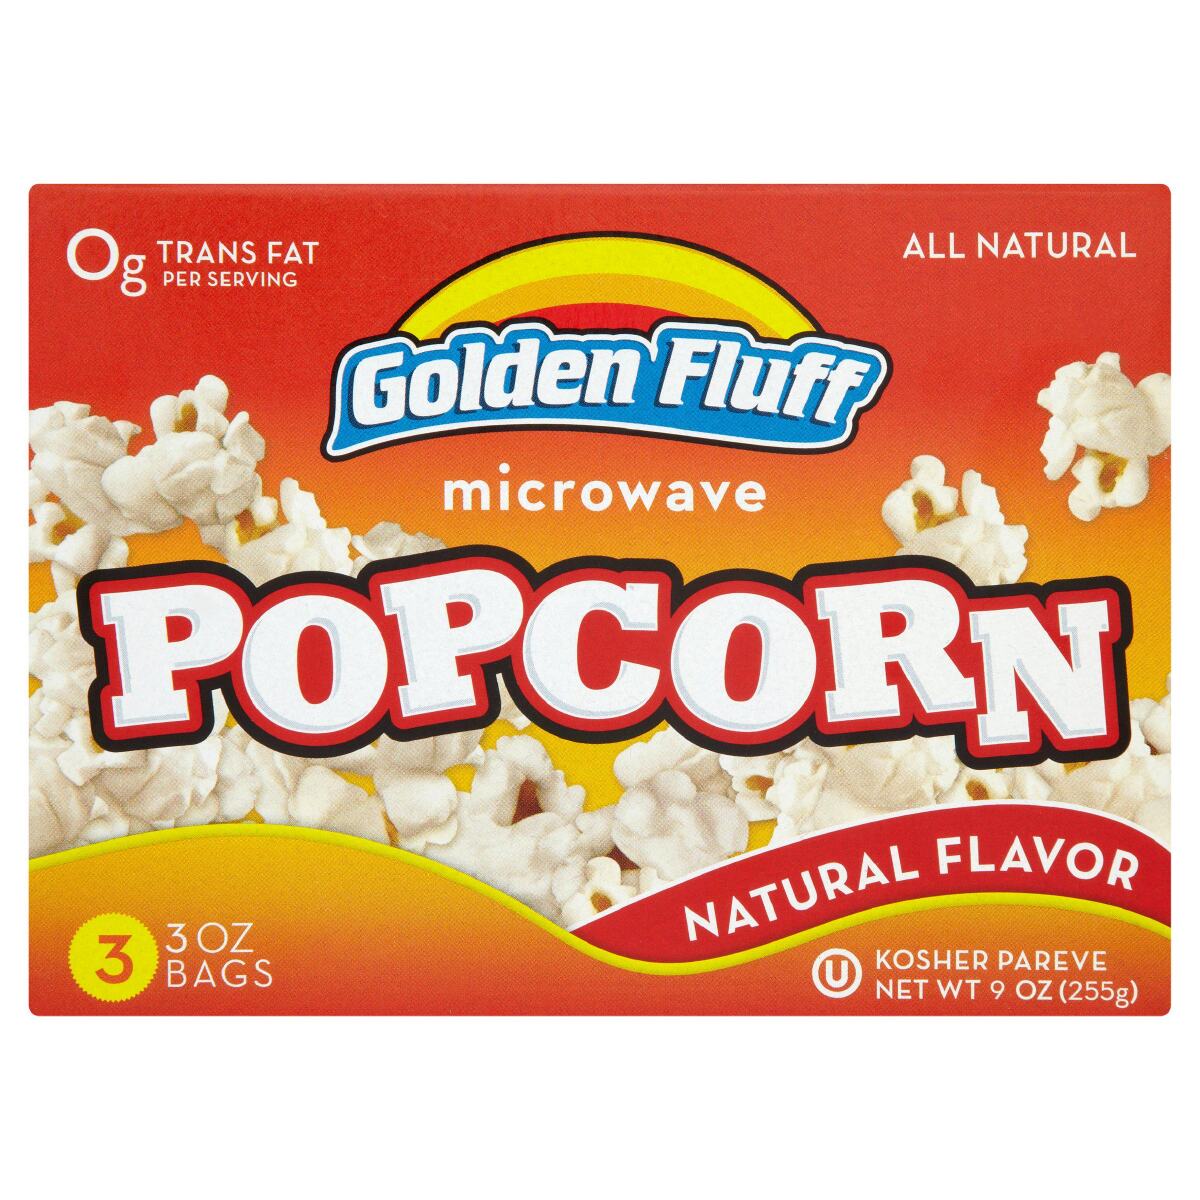 A red and orange box of Golden Fluff microwave, vegan-friendly popcorn against a white background. 